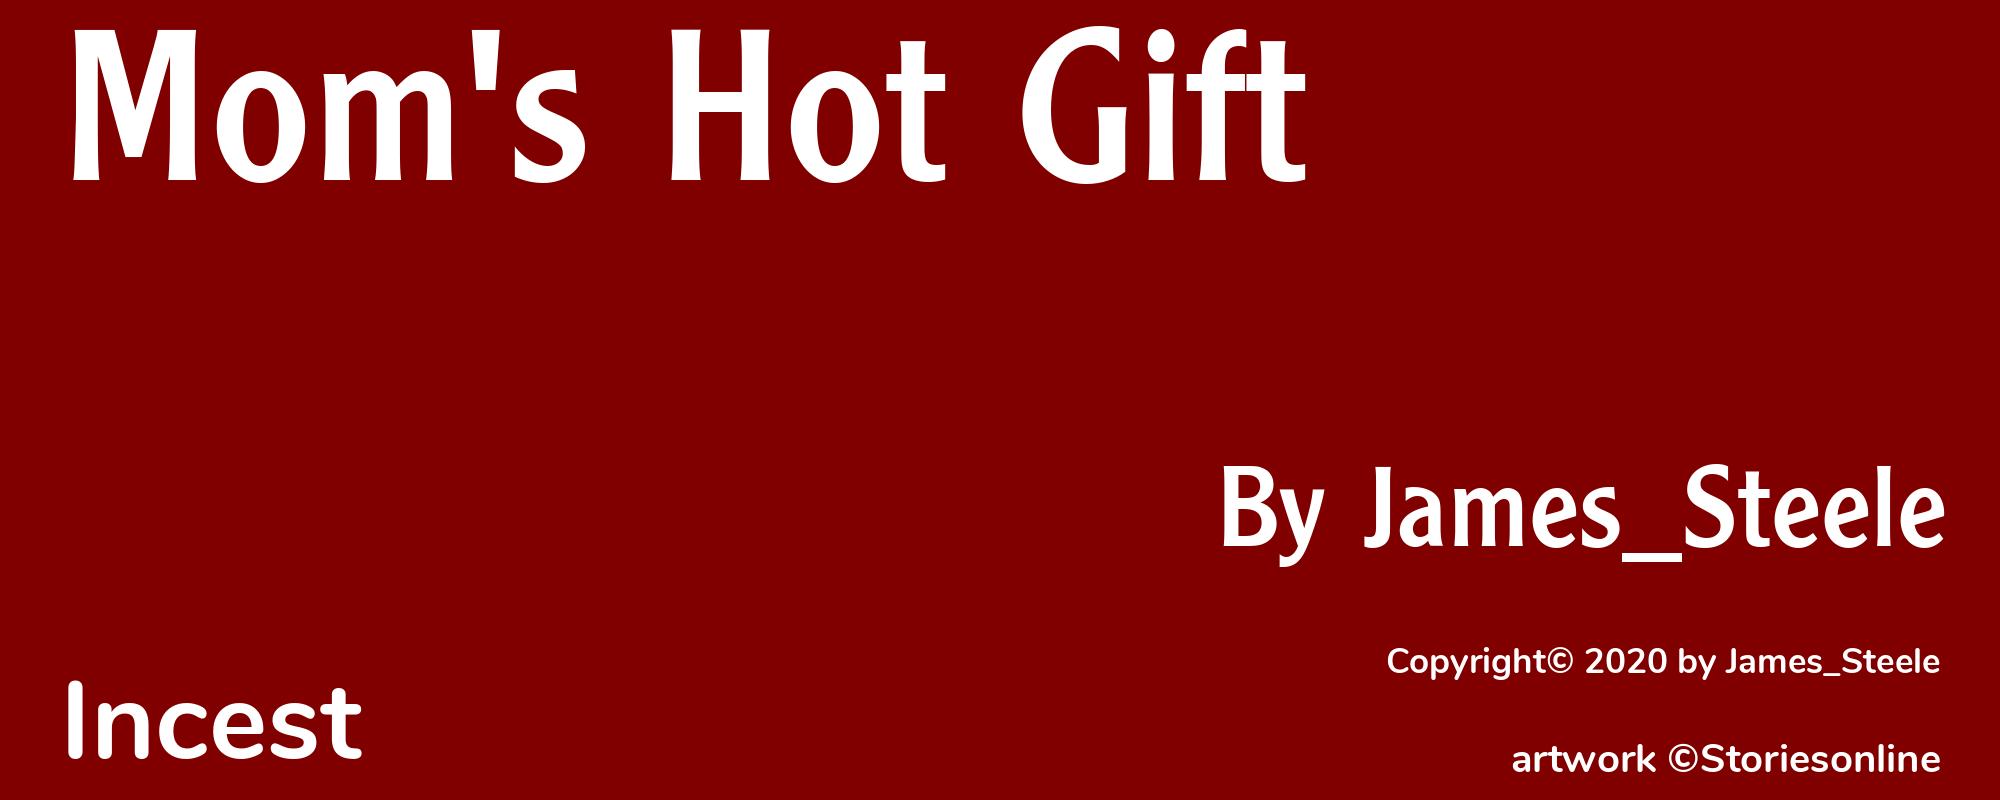 Mom's Hot Gift - Cover